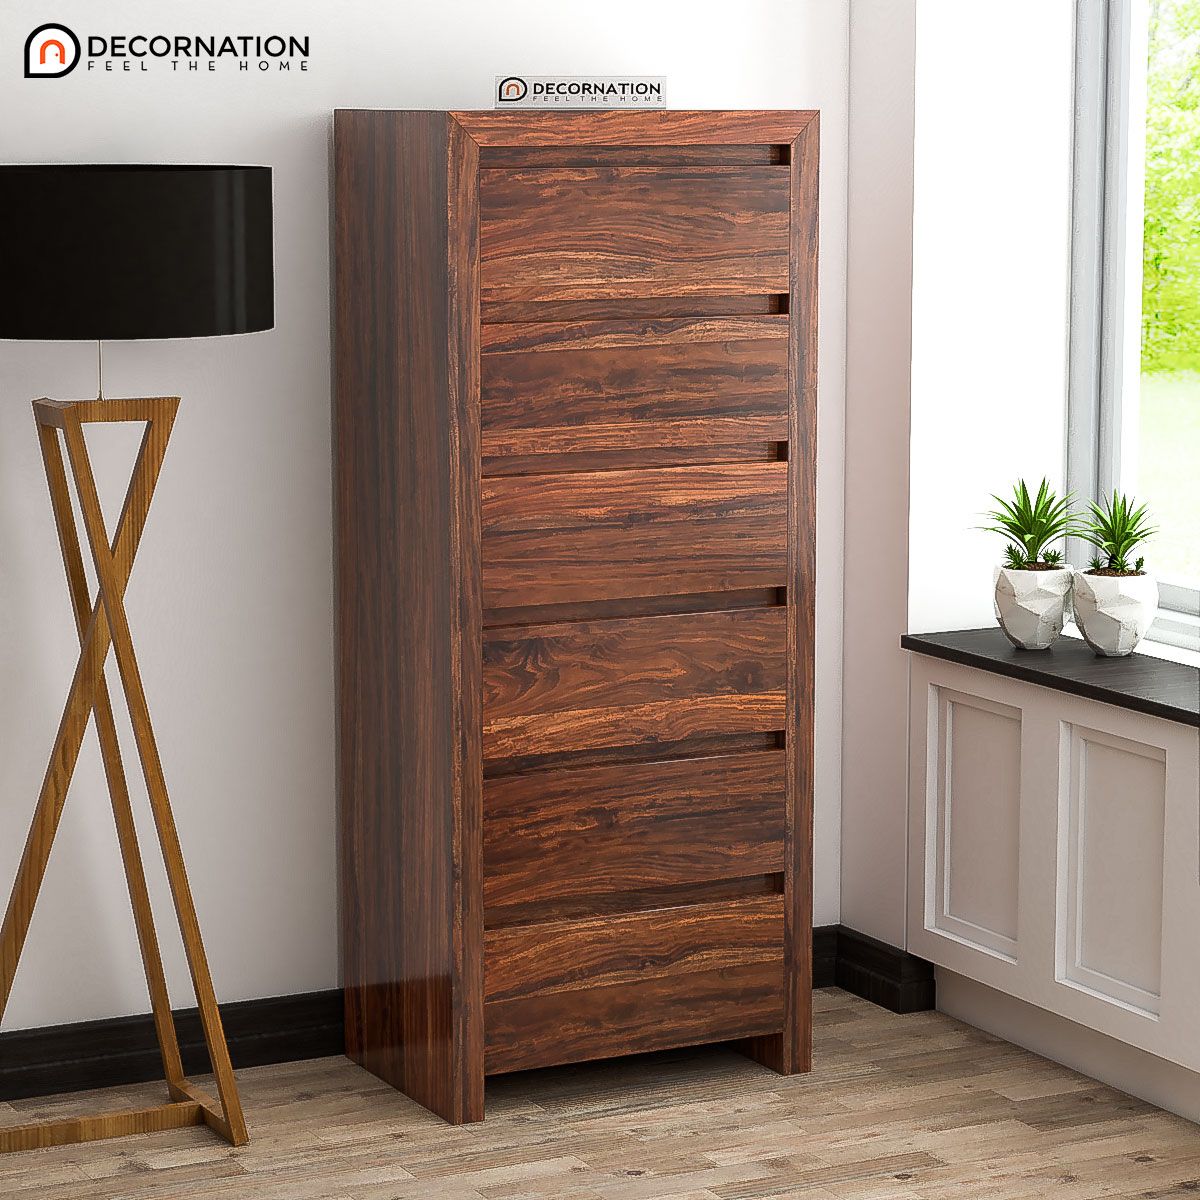 Adara Wooden Storage Cabinet – Natural Finish – Decornation In Wood Cabinet With Drawers (Photo 5 of 15)